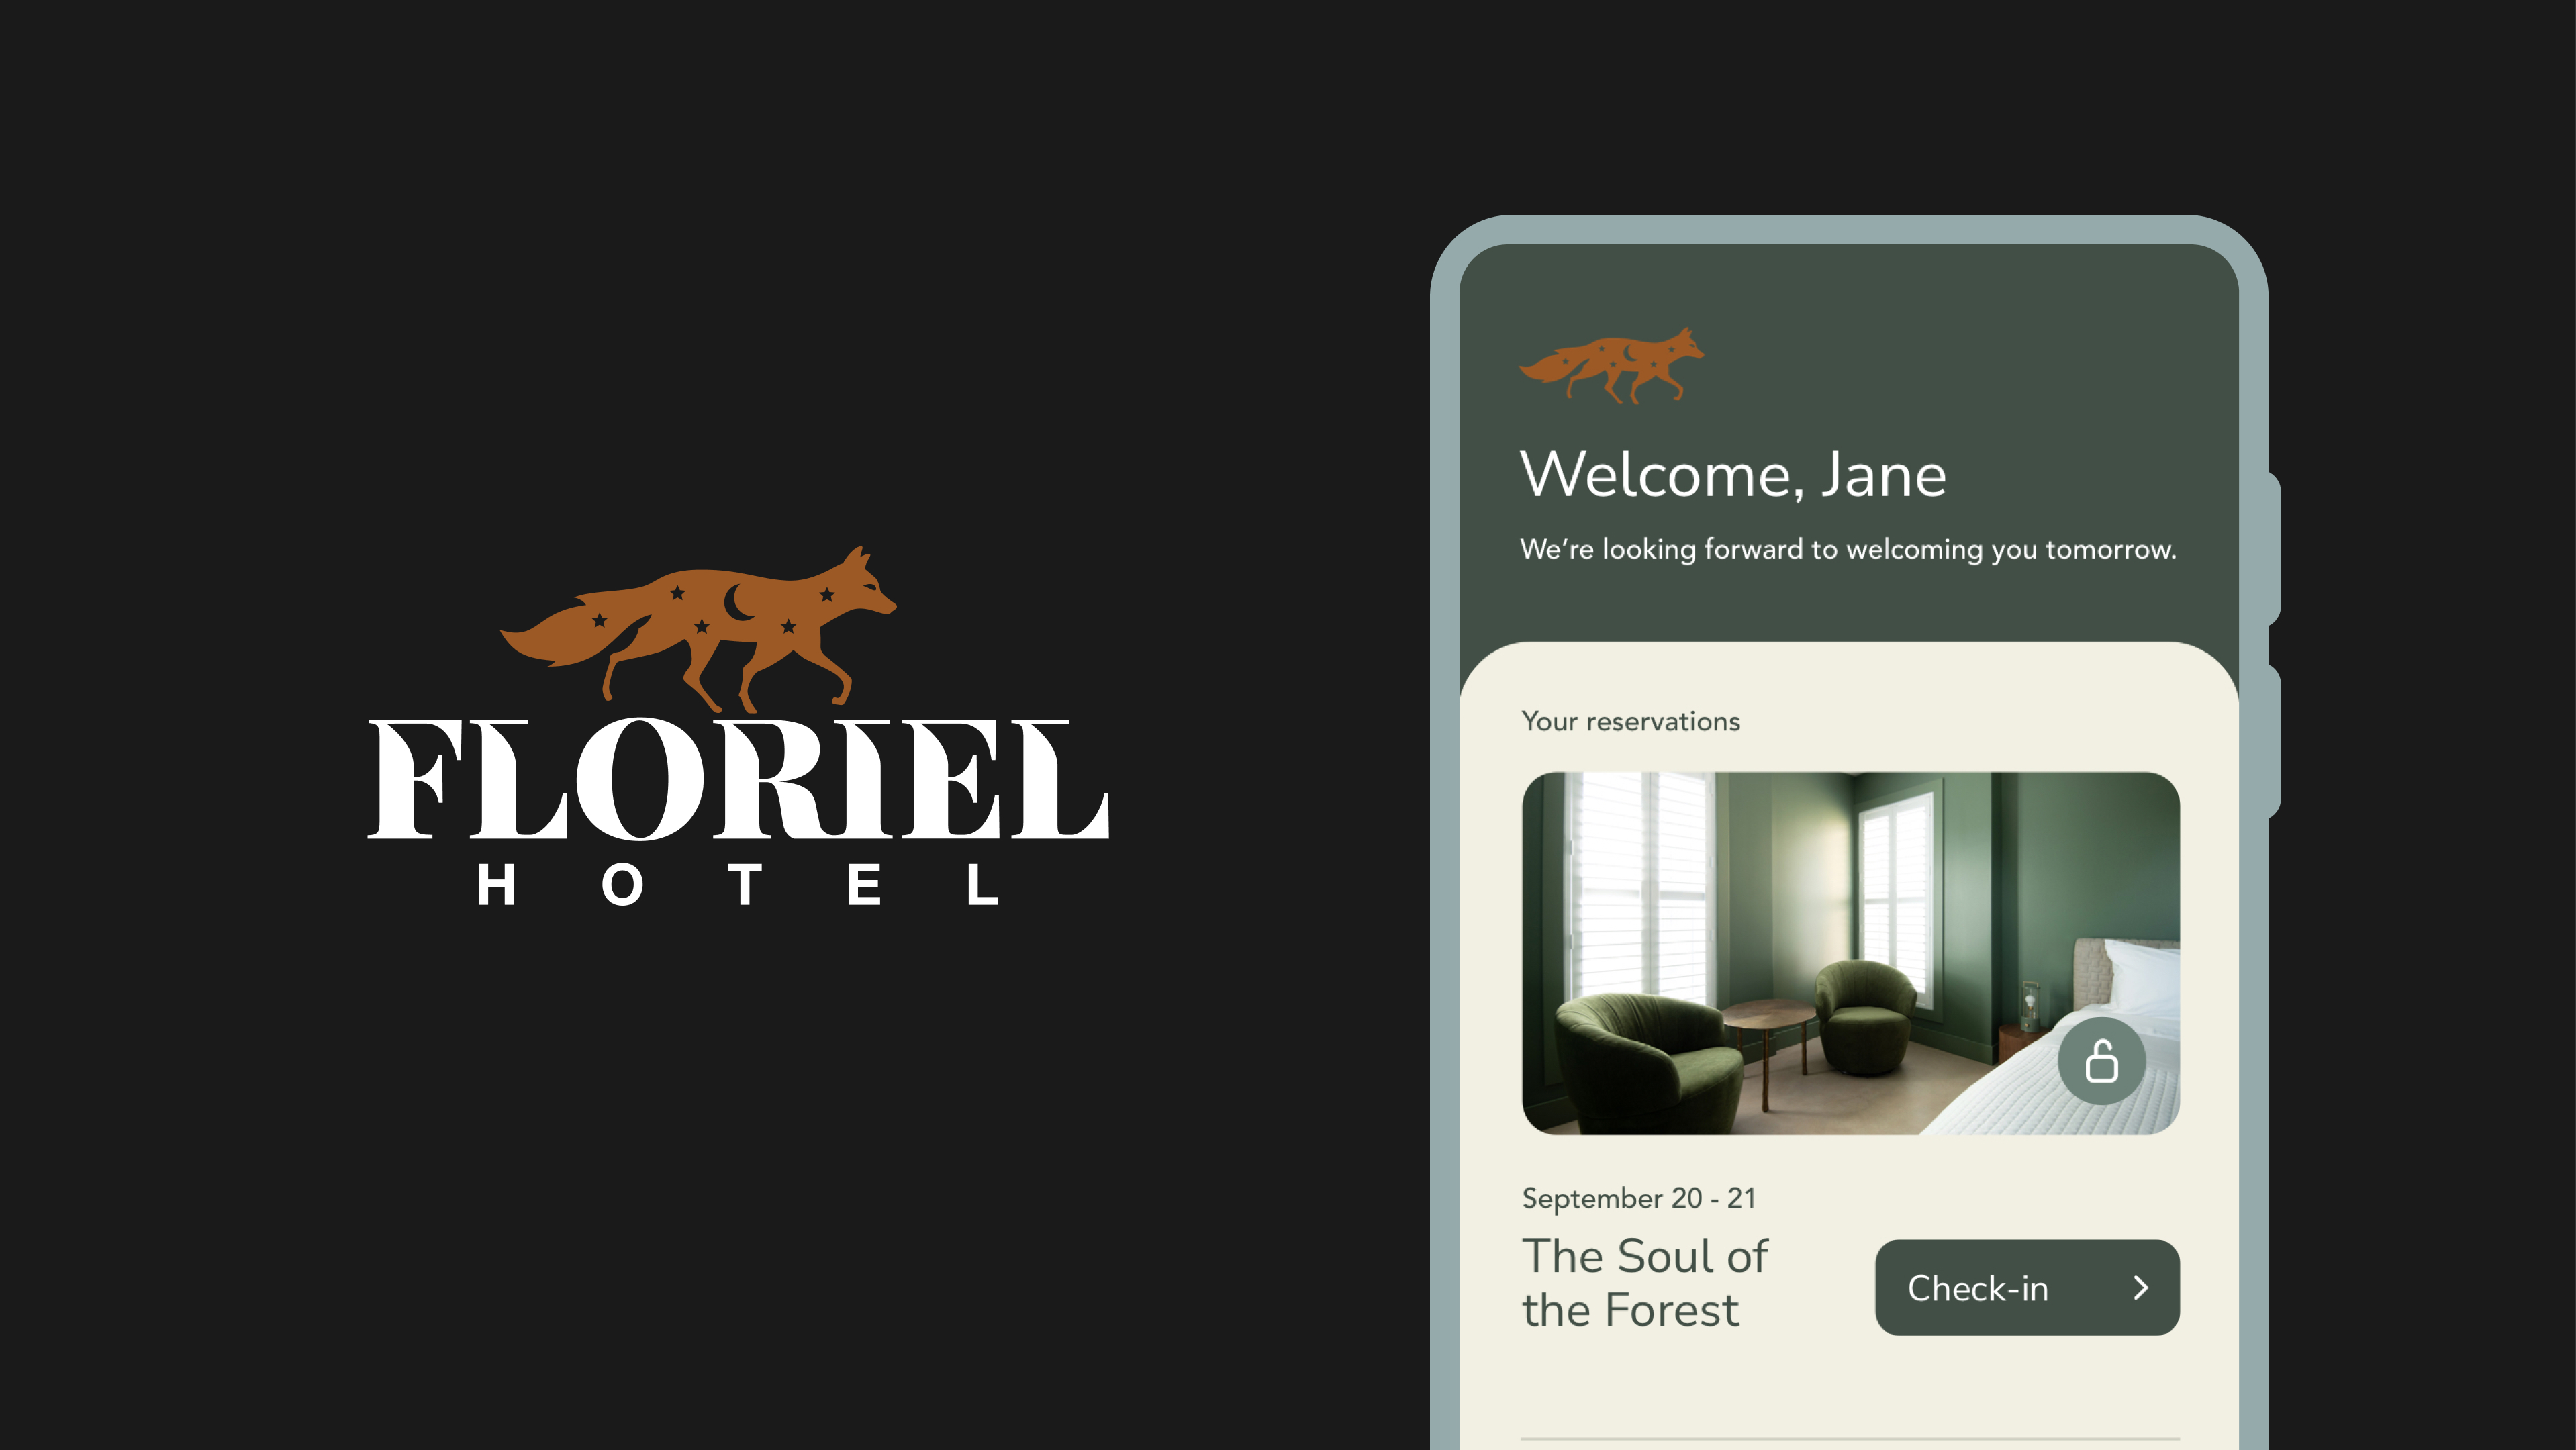 Hotel Floriel: A connected hotel experience